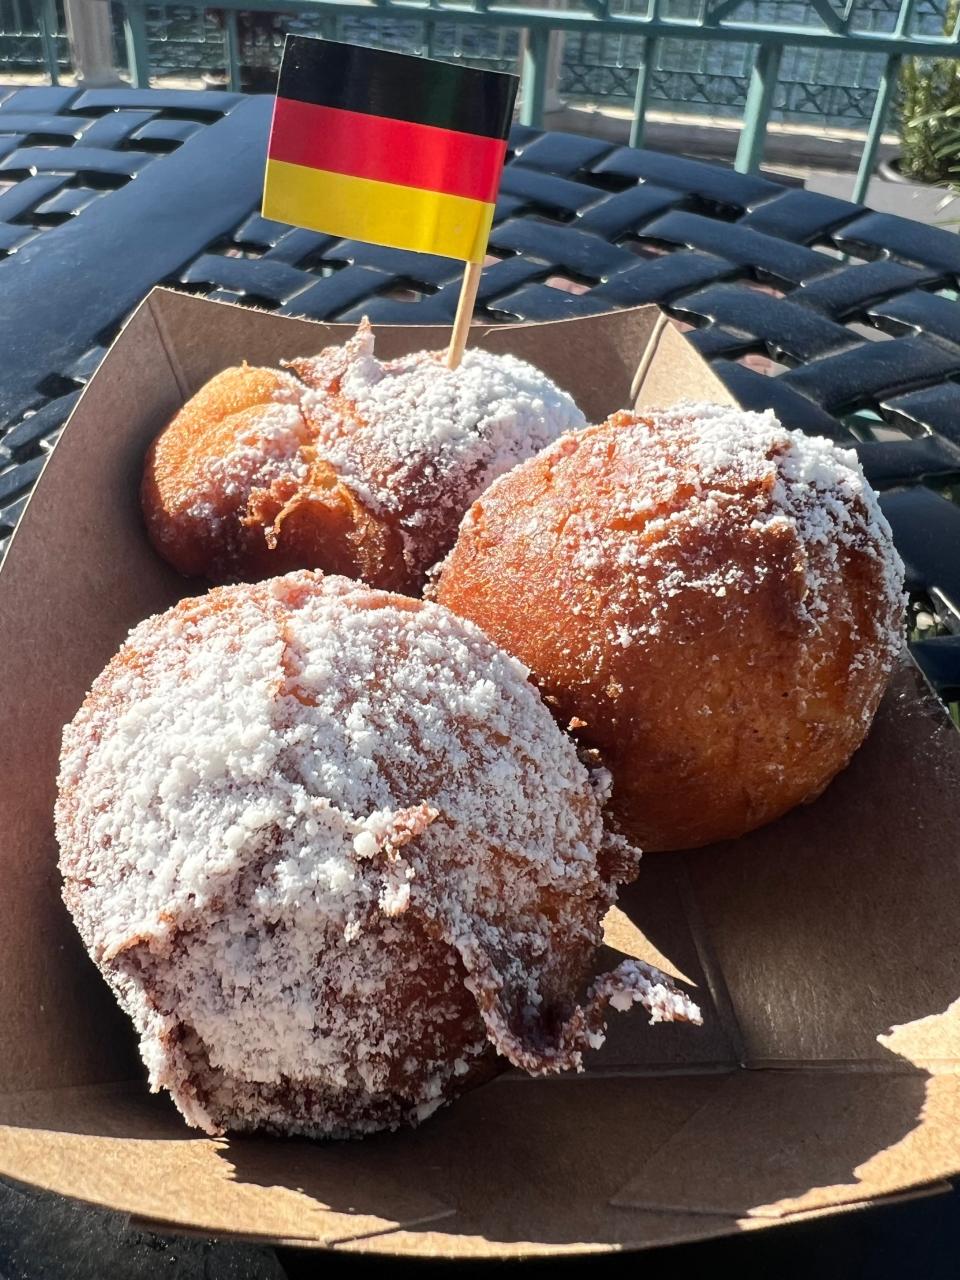 Chef Jens Dahlmann joked that Mutzen, a Karneval style beignet from his native Germany, is better than the beignets Americans are used to. Both kinds are available at Universal Orlando's Mardi Gras.